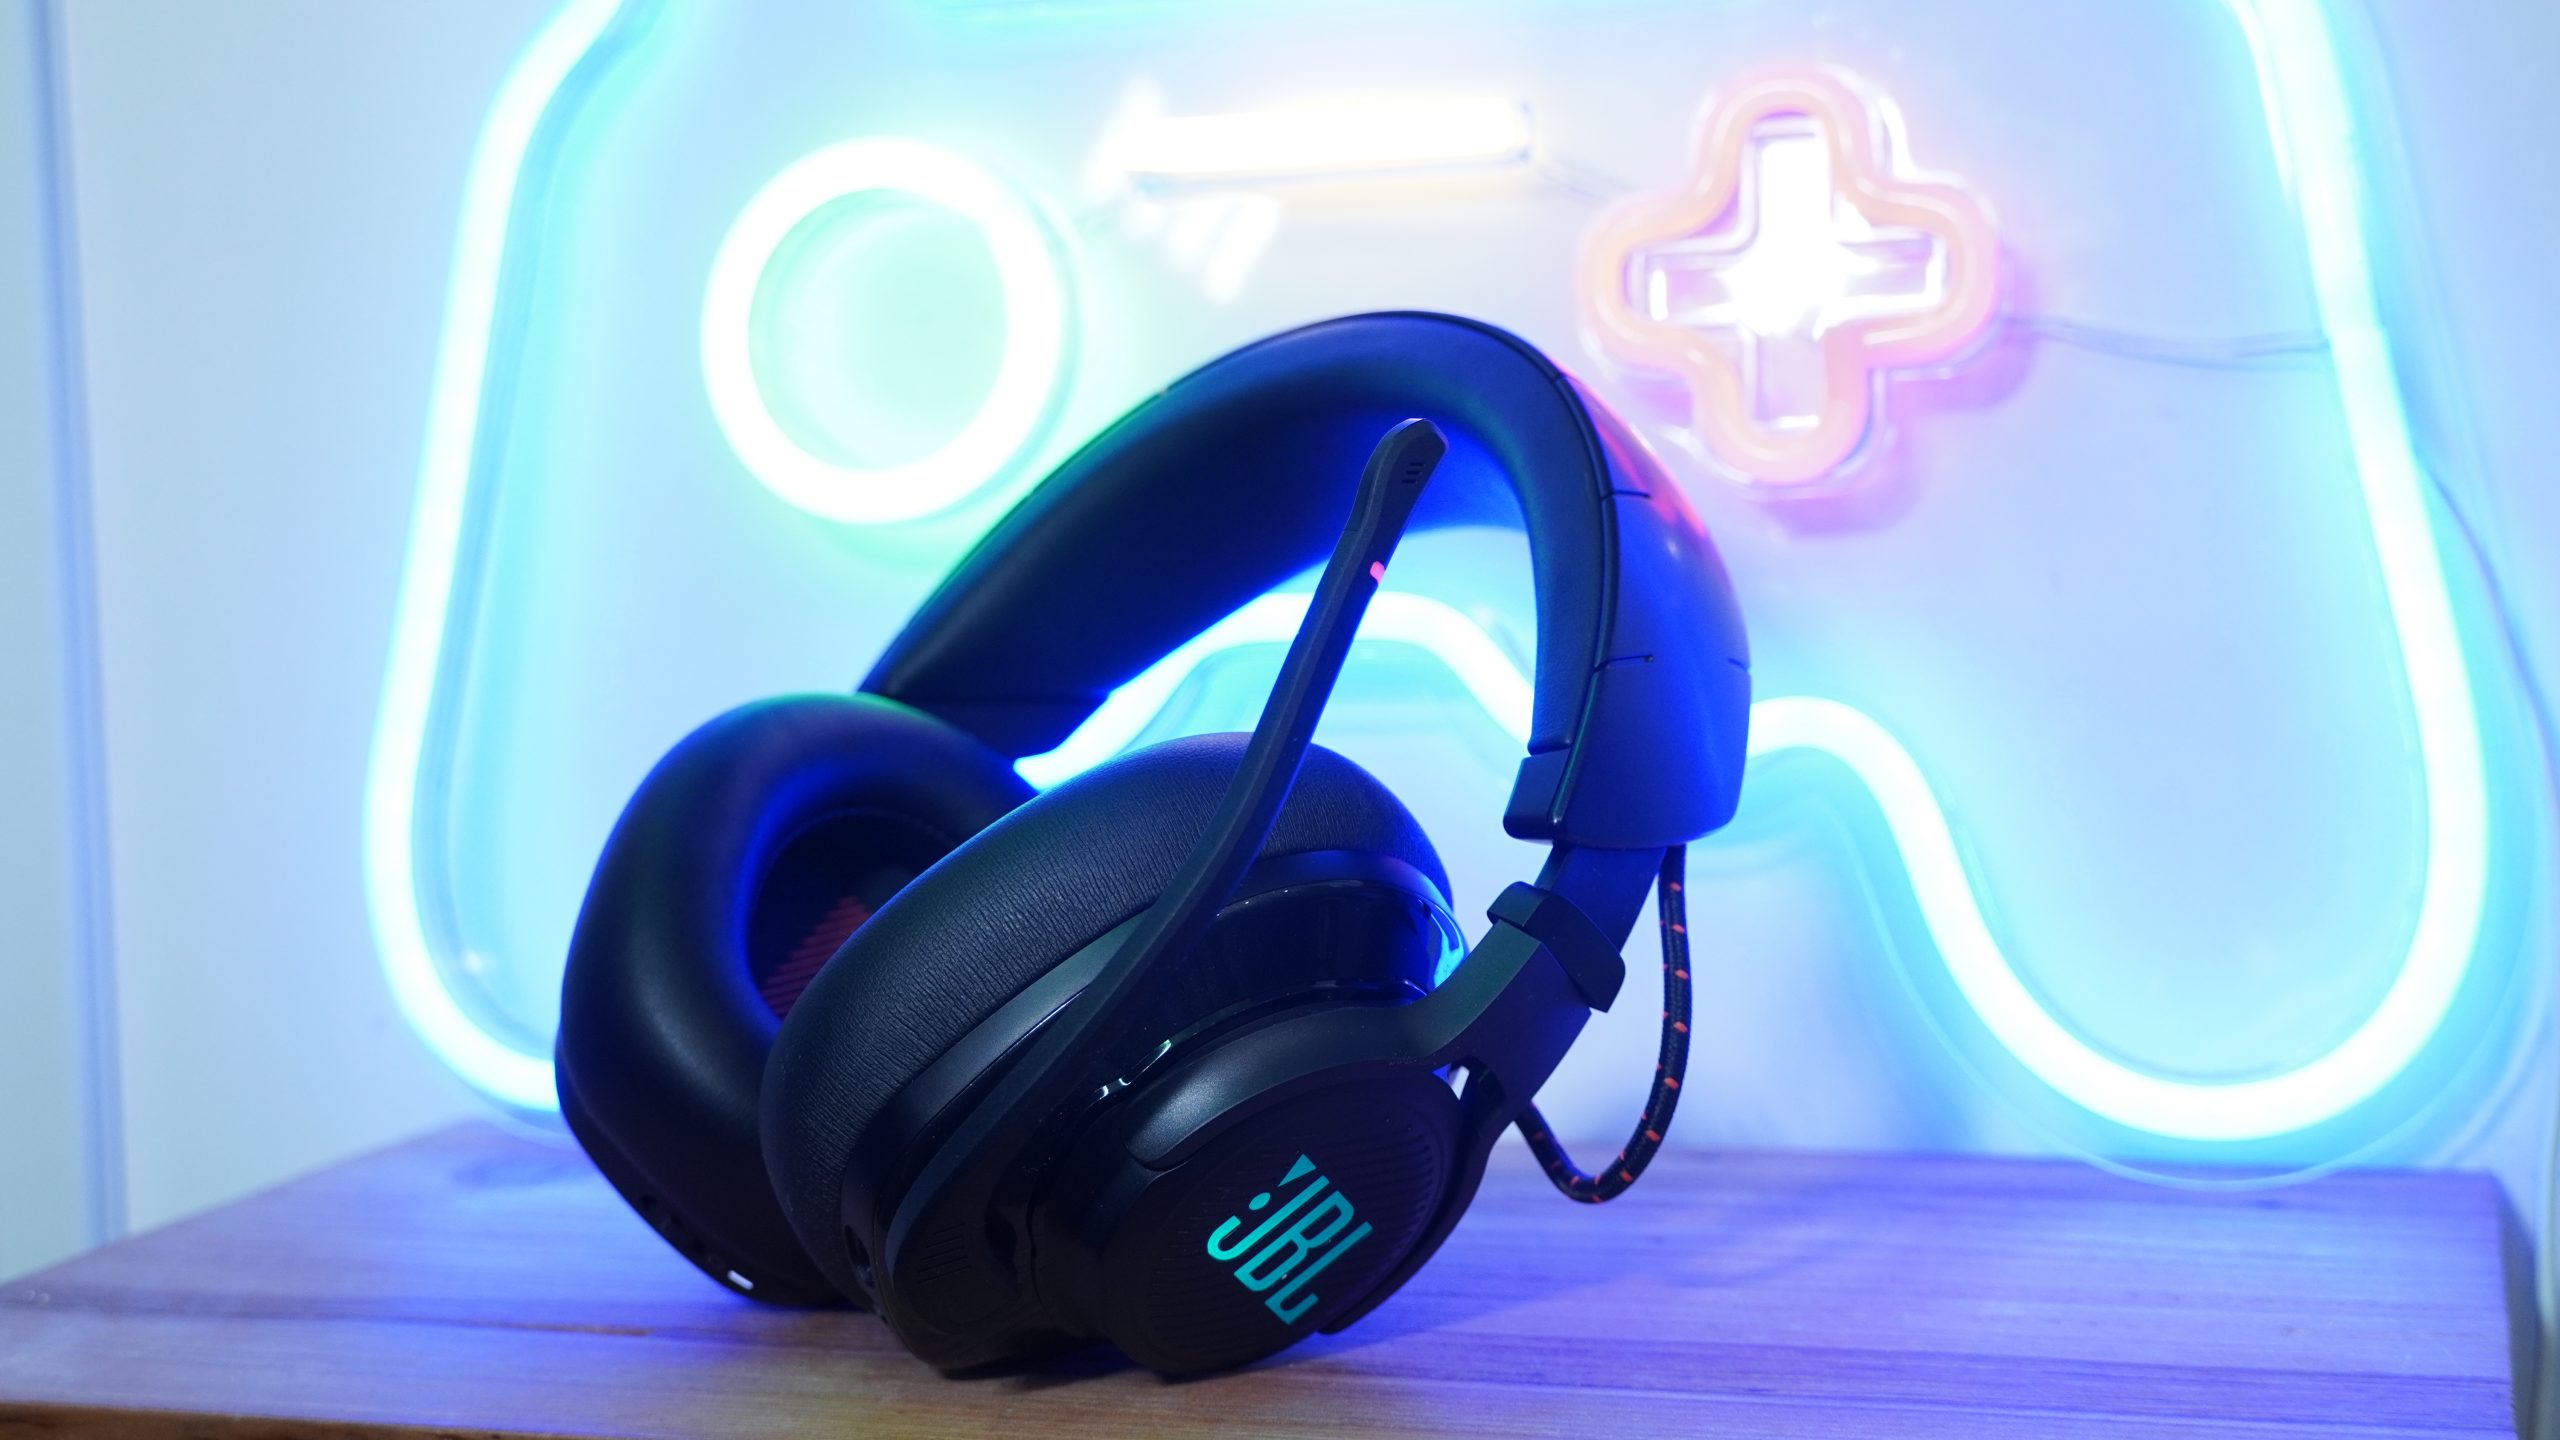 The JBL Quantum 600 in front of a neon game controller sign